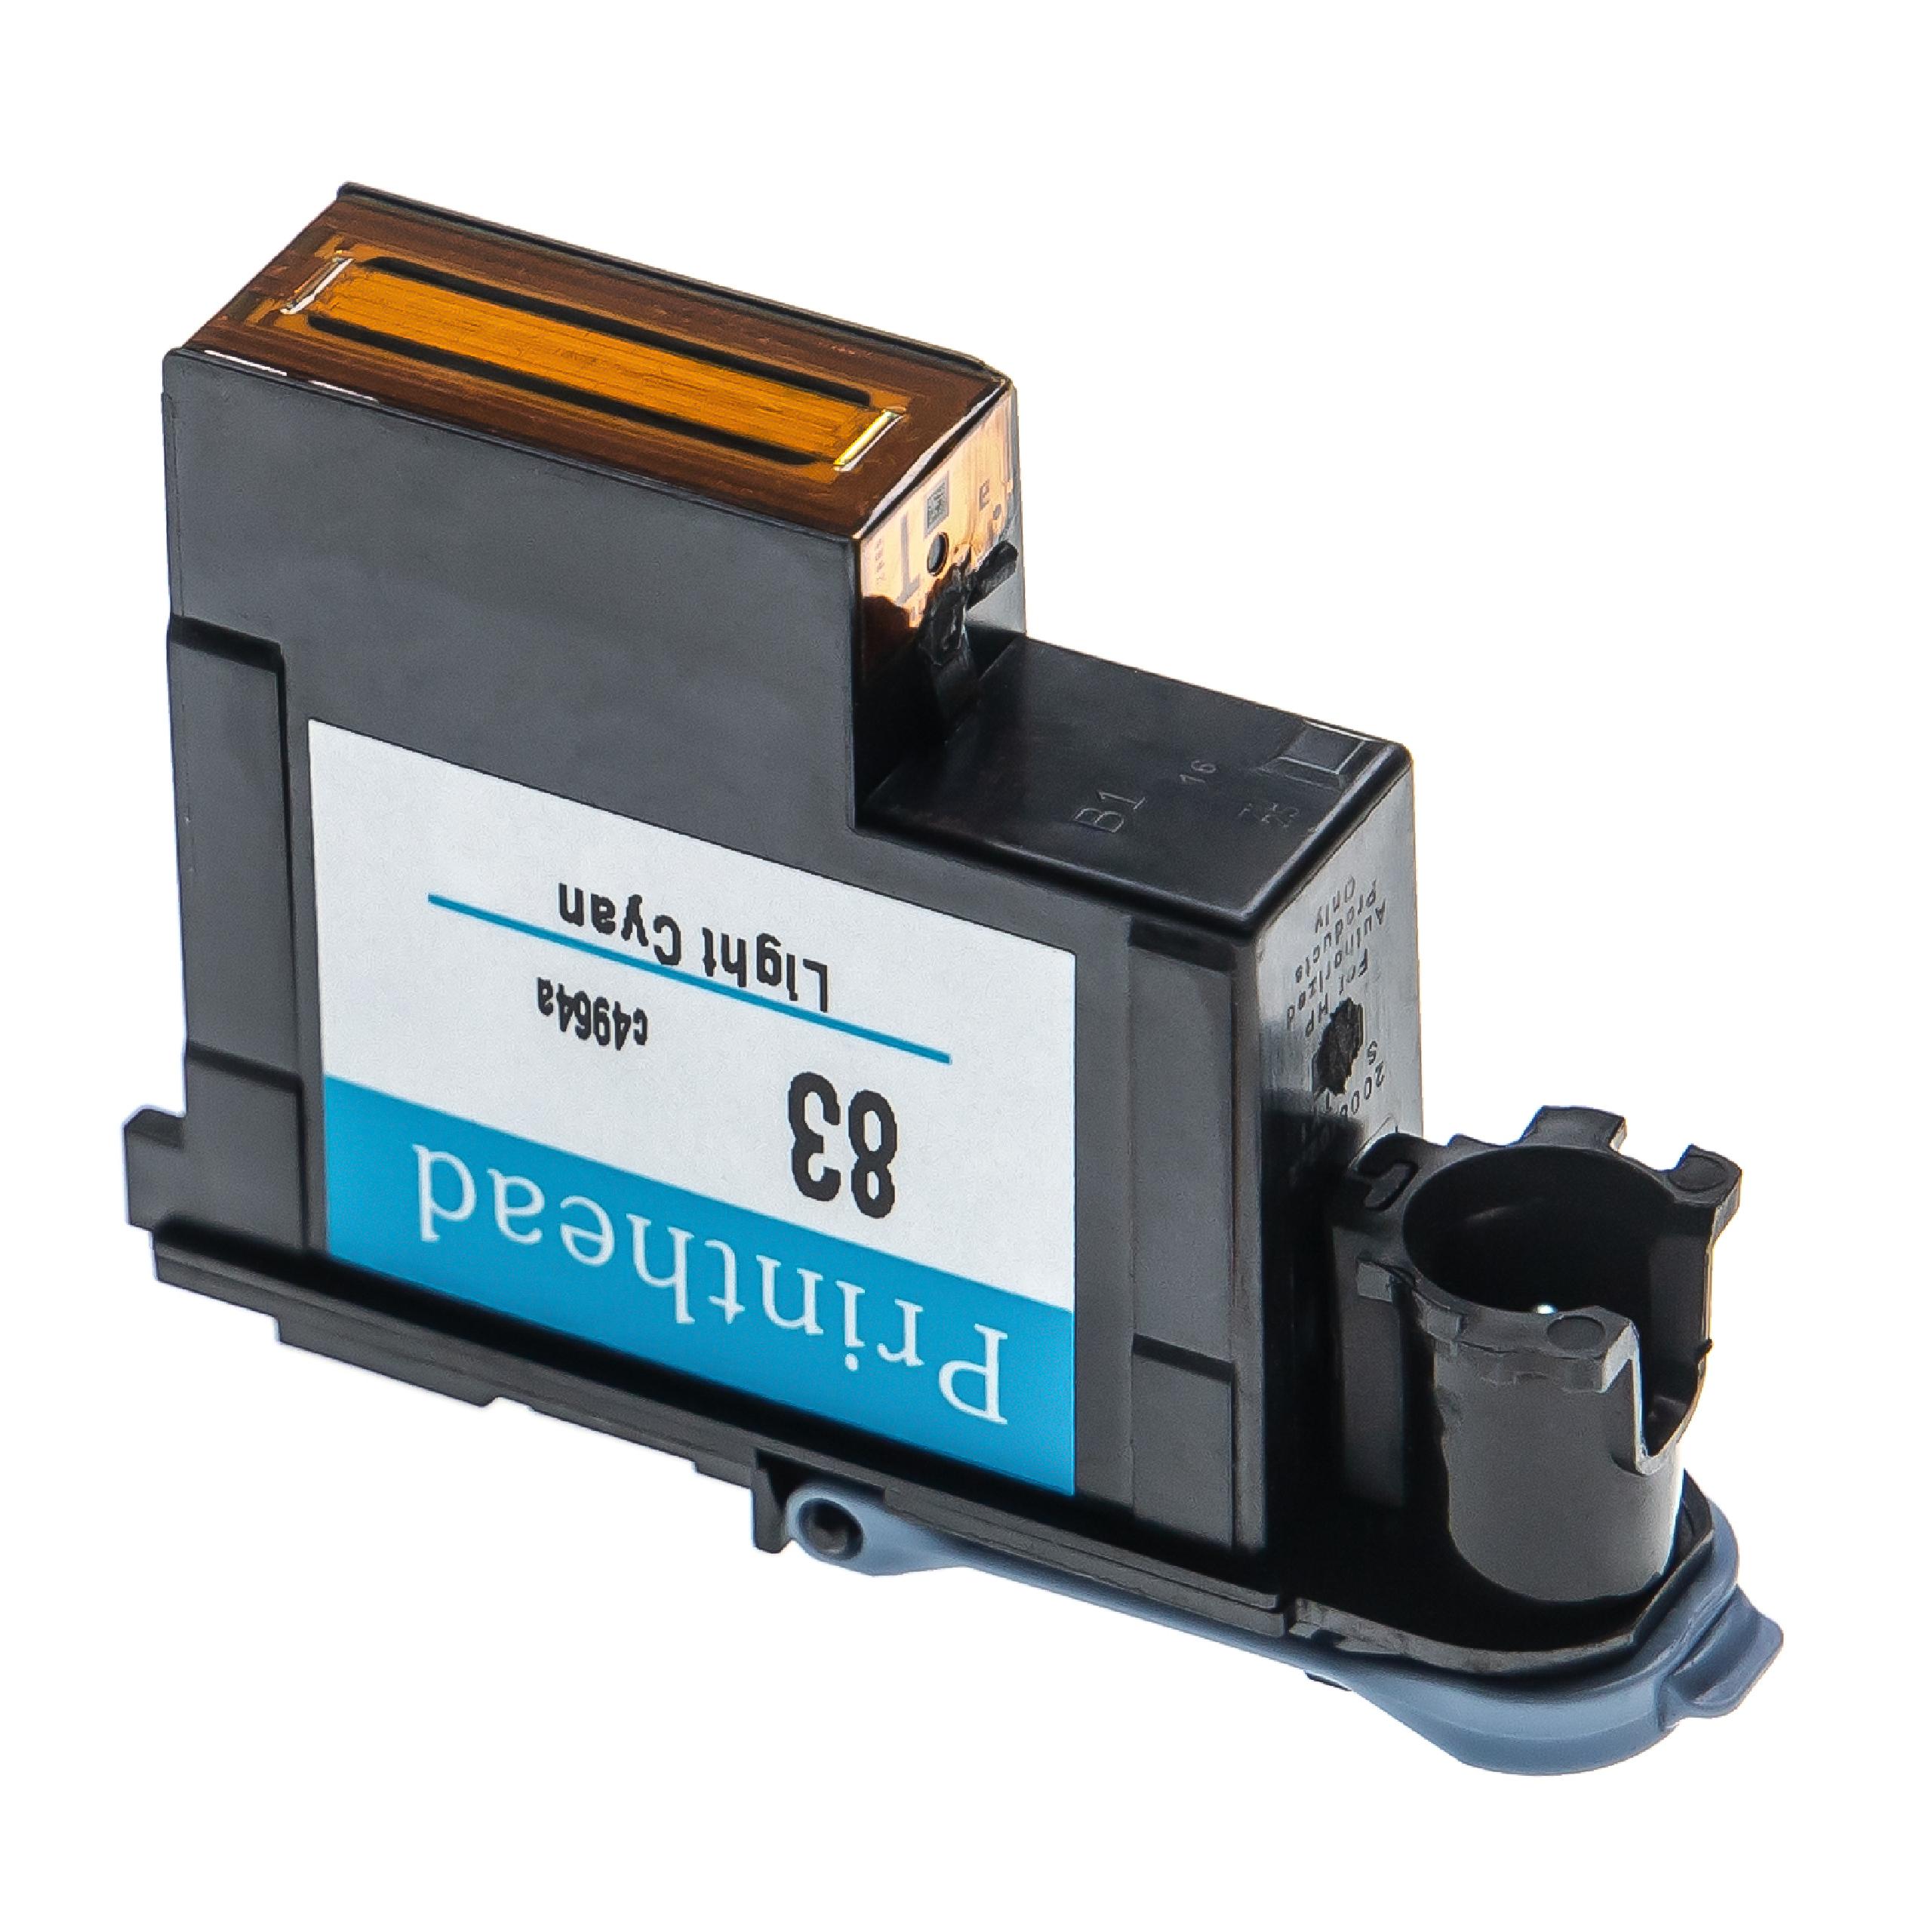 Printhead for HP DesignJet HP C4964A Printer - 13 ml, light cyan, 6 cm wide, Refurbished, With Cleaner